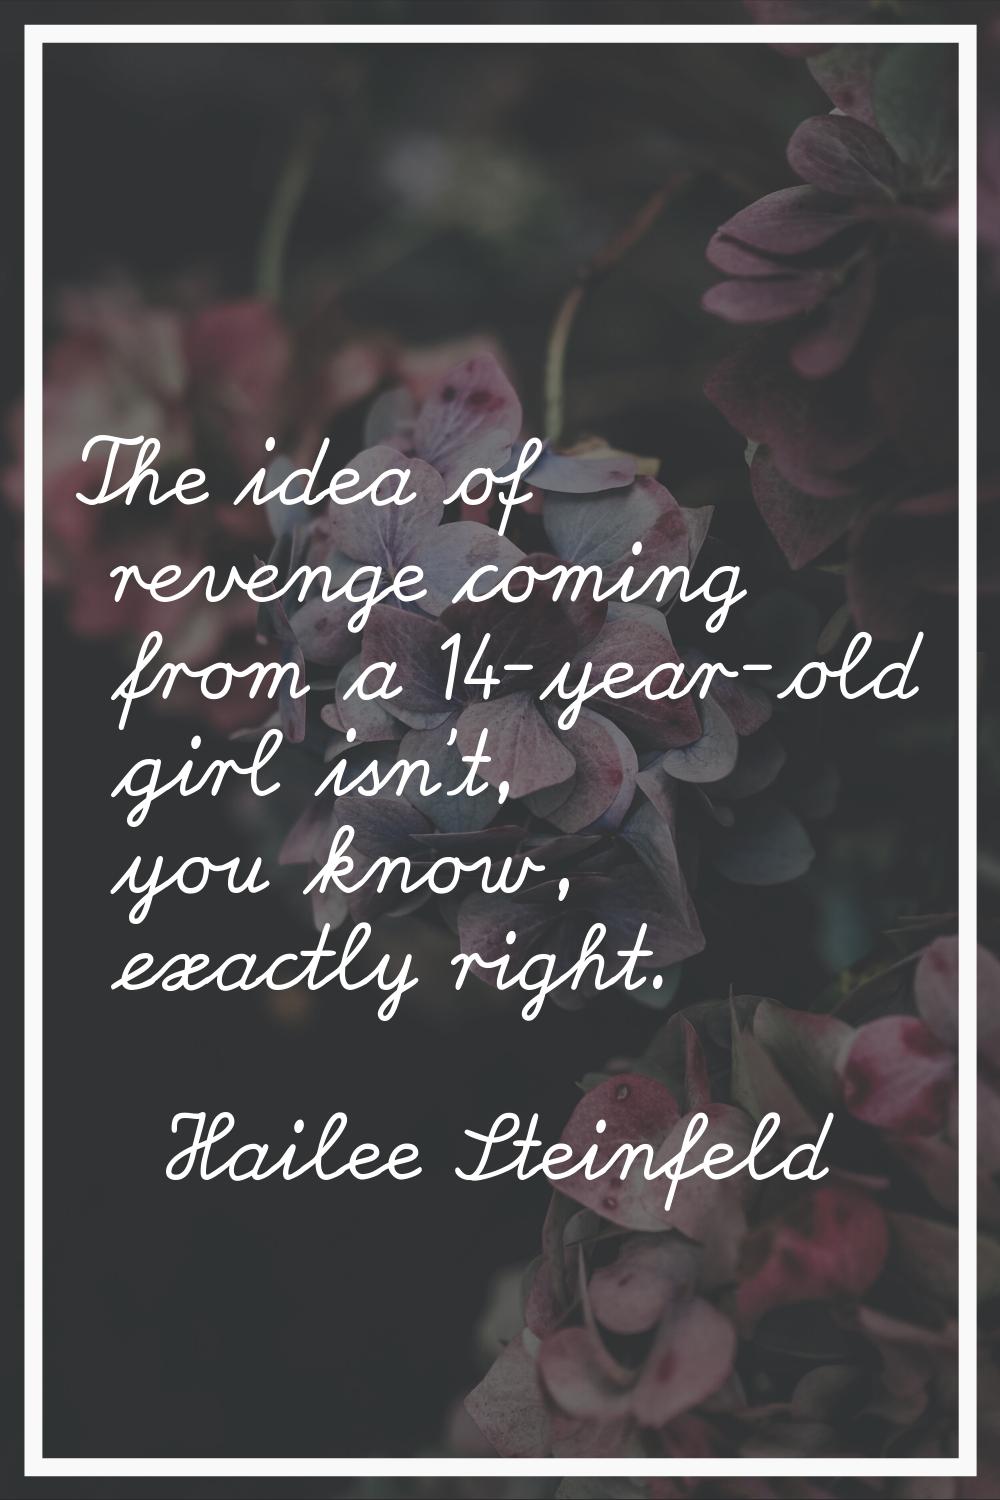 The idea of revenge coming from a 14-year-old girl isn't, you know, exactly right.